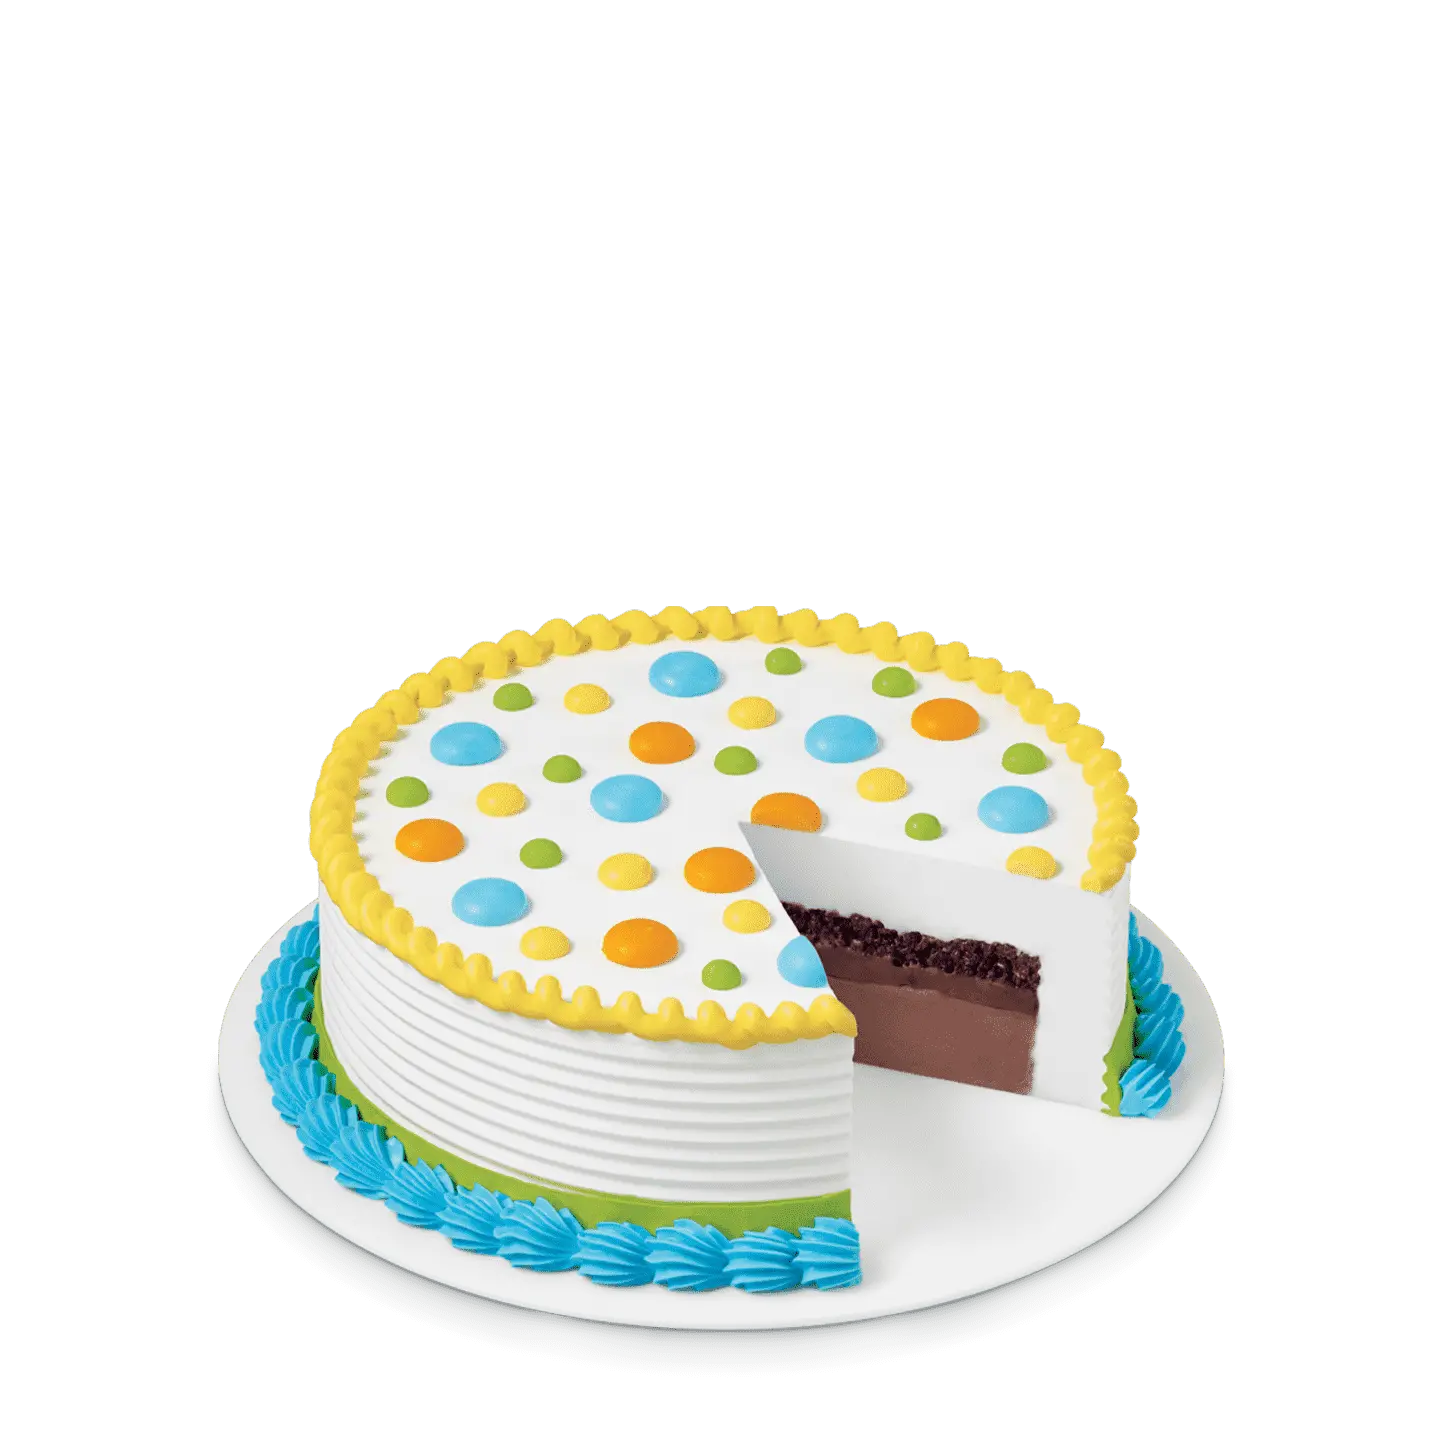 Eat Cake Today - Online Cake Delivery From Malaysia's Best Bakers | Cake, Cakes  today, Online cake delivery